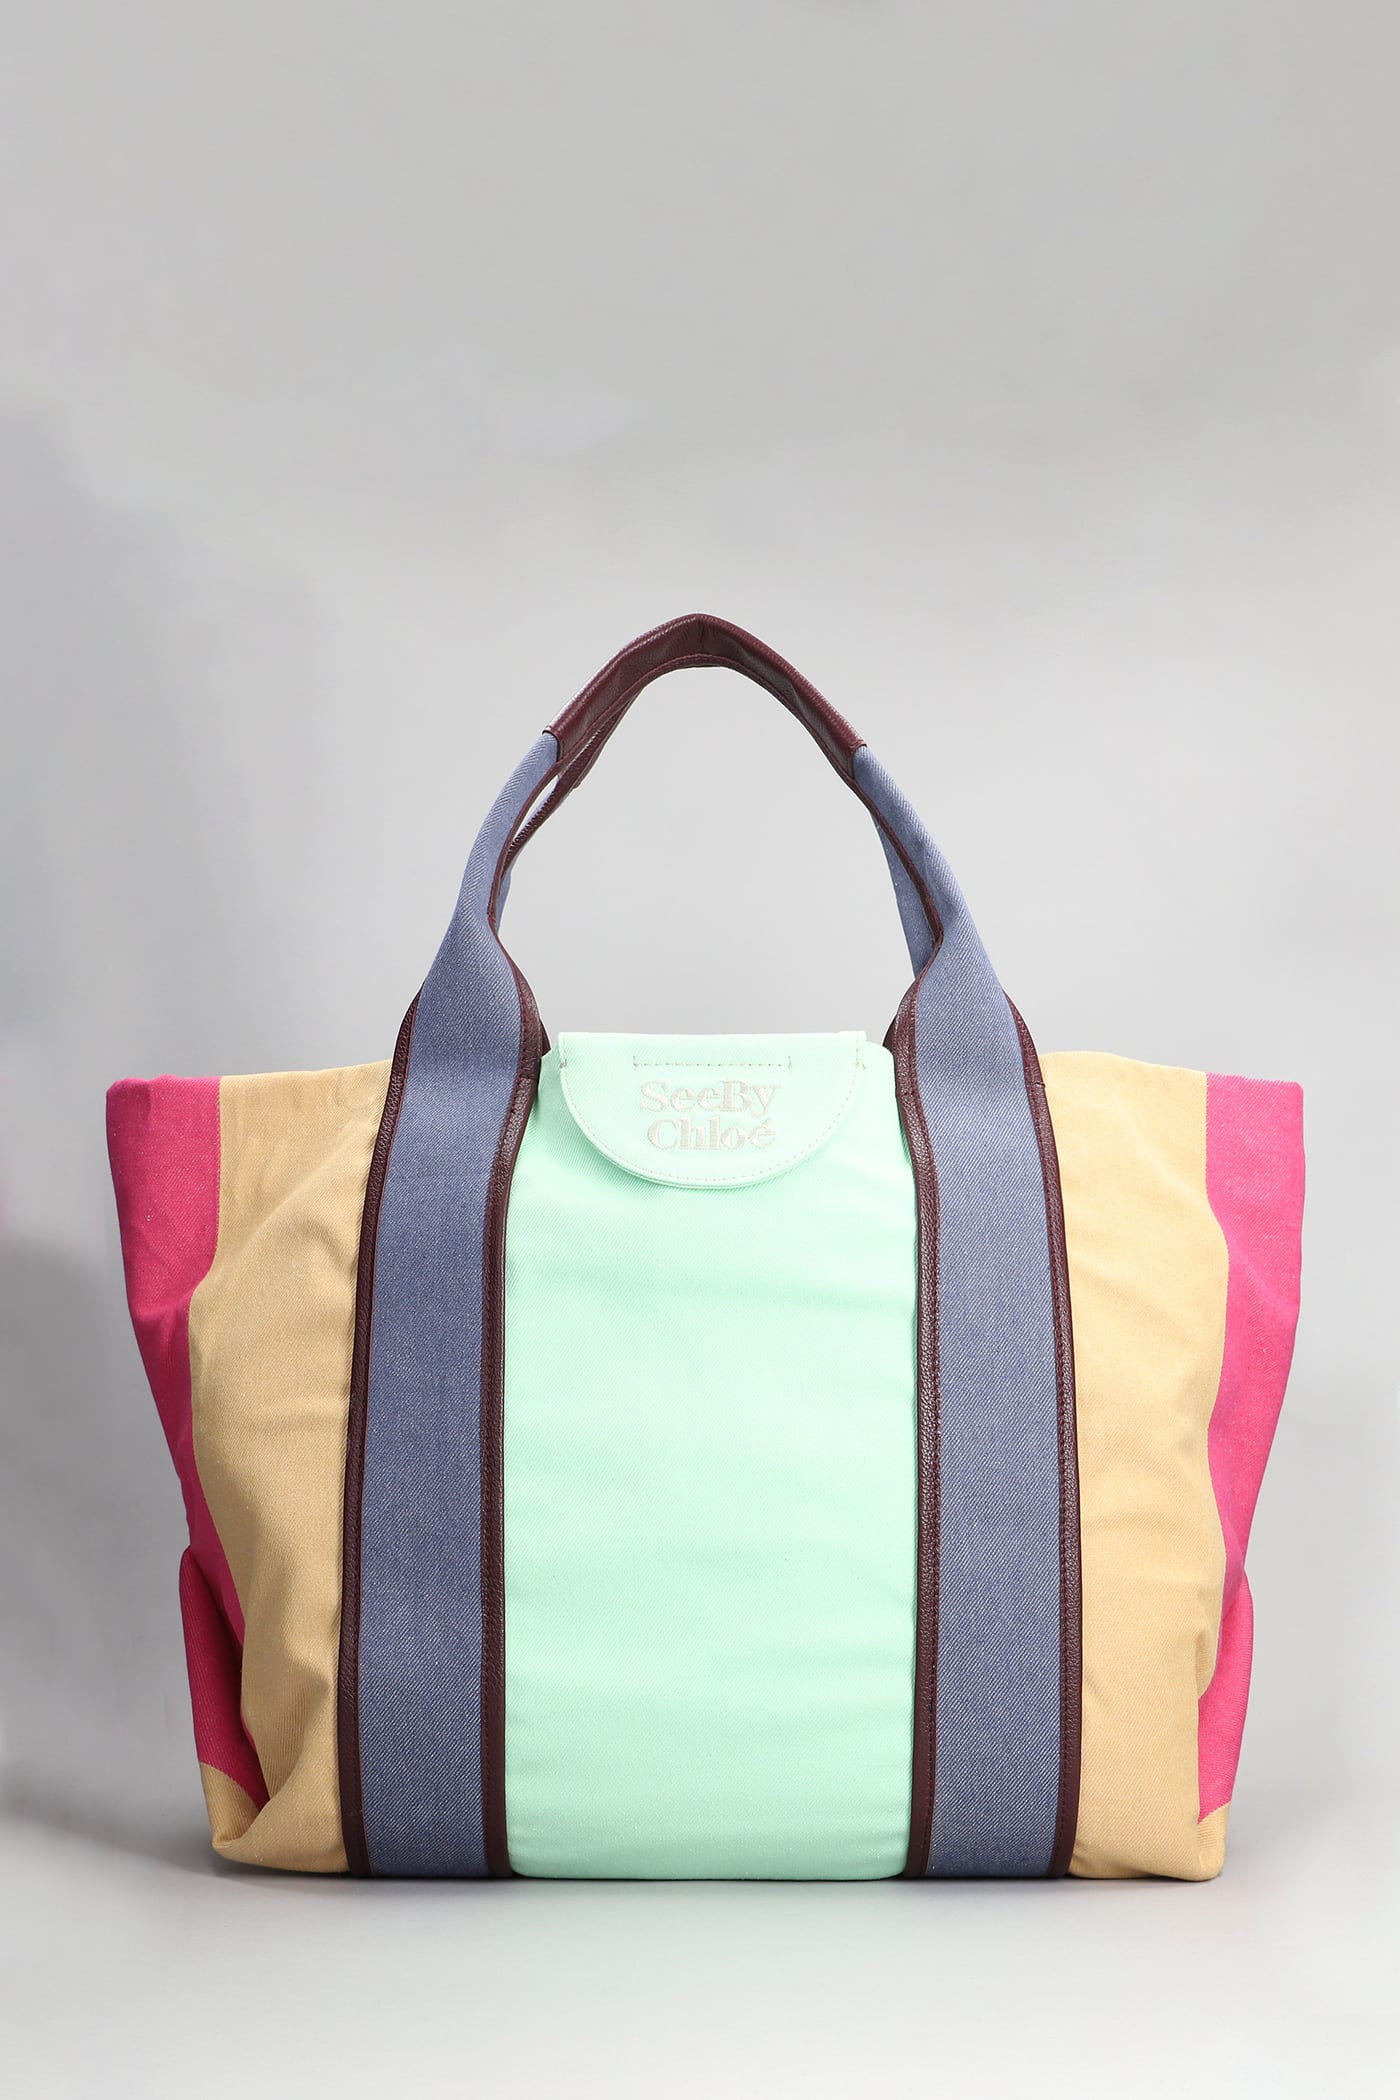 SEE BY CHLOÉ TOTE IN MULTICOLOR CANVAS